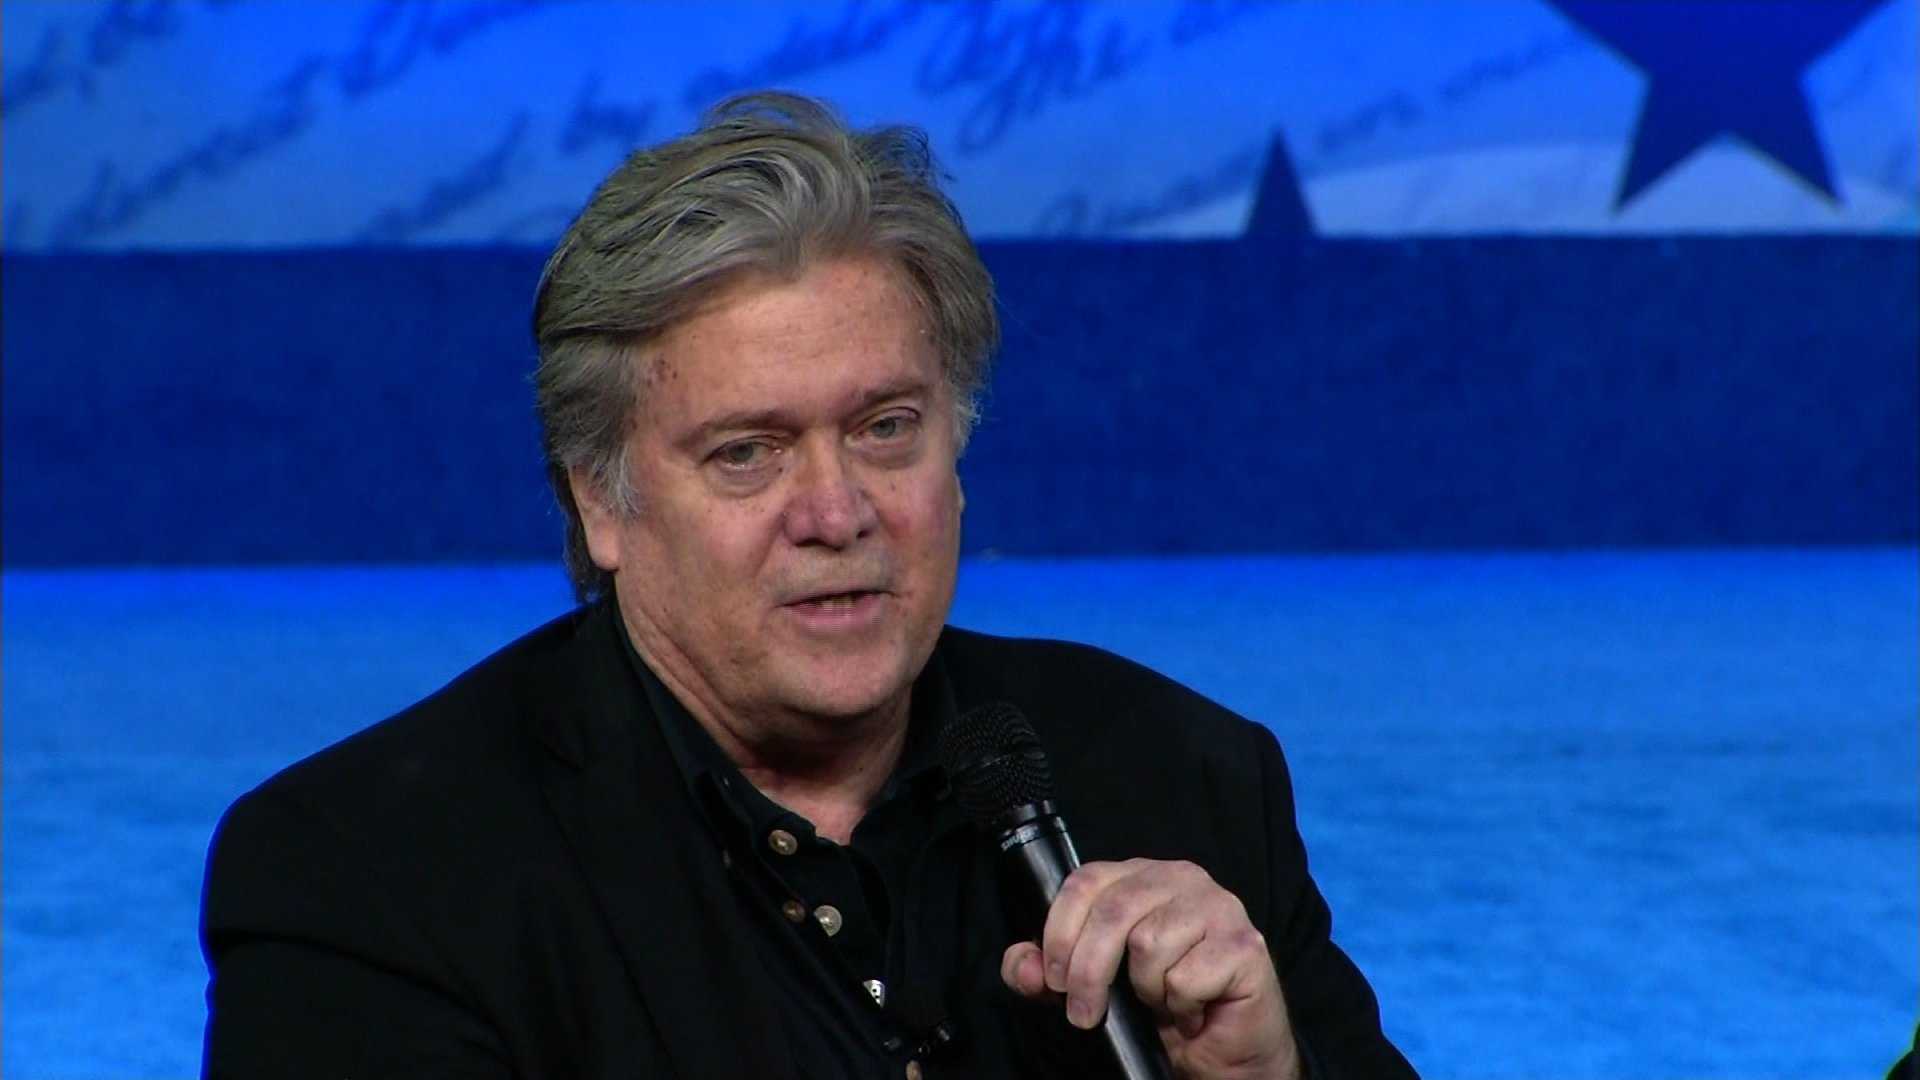 Reports: Steve Bannon out as White House chief strategist